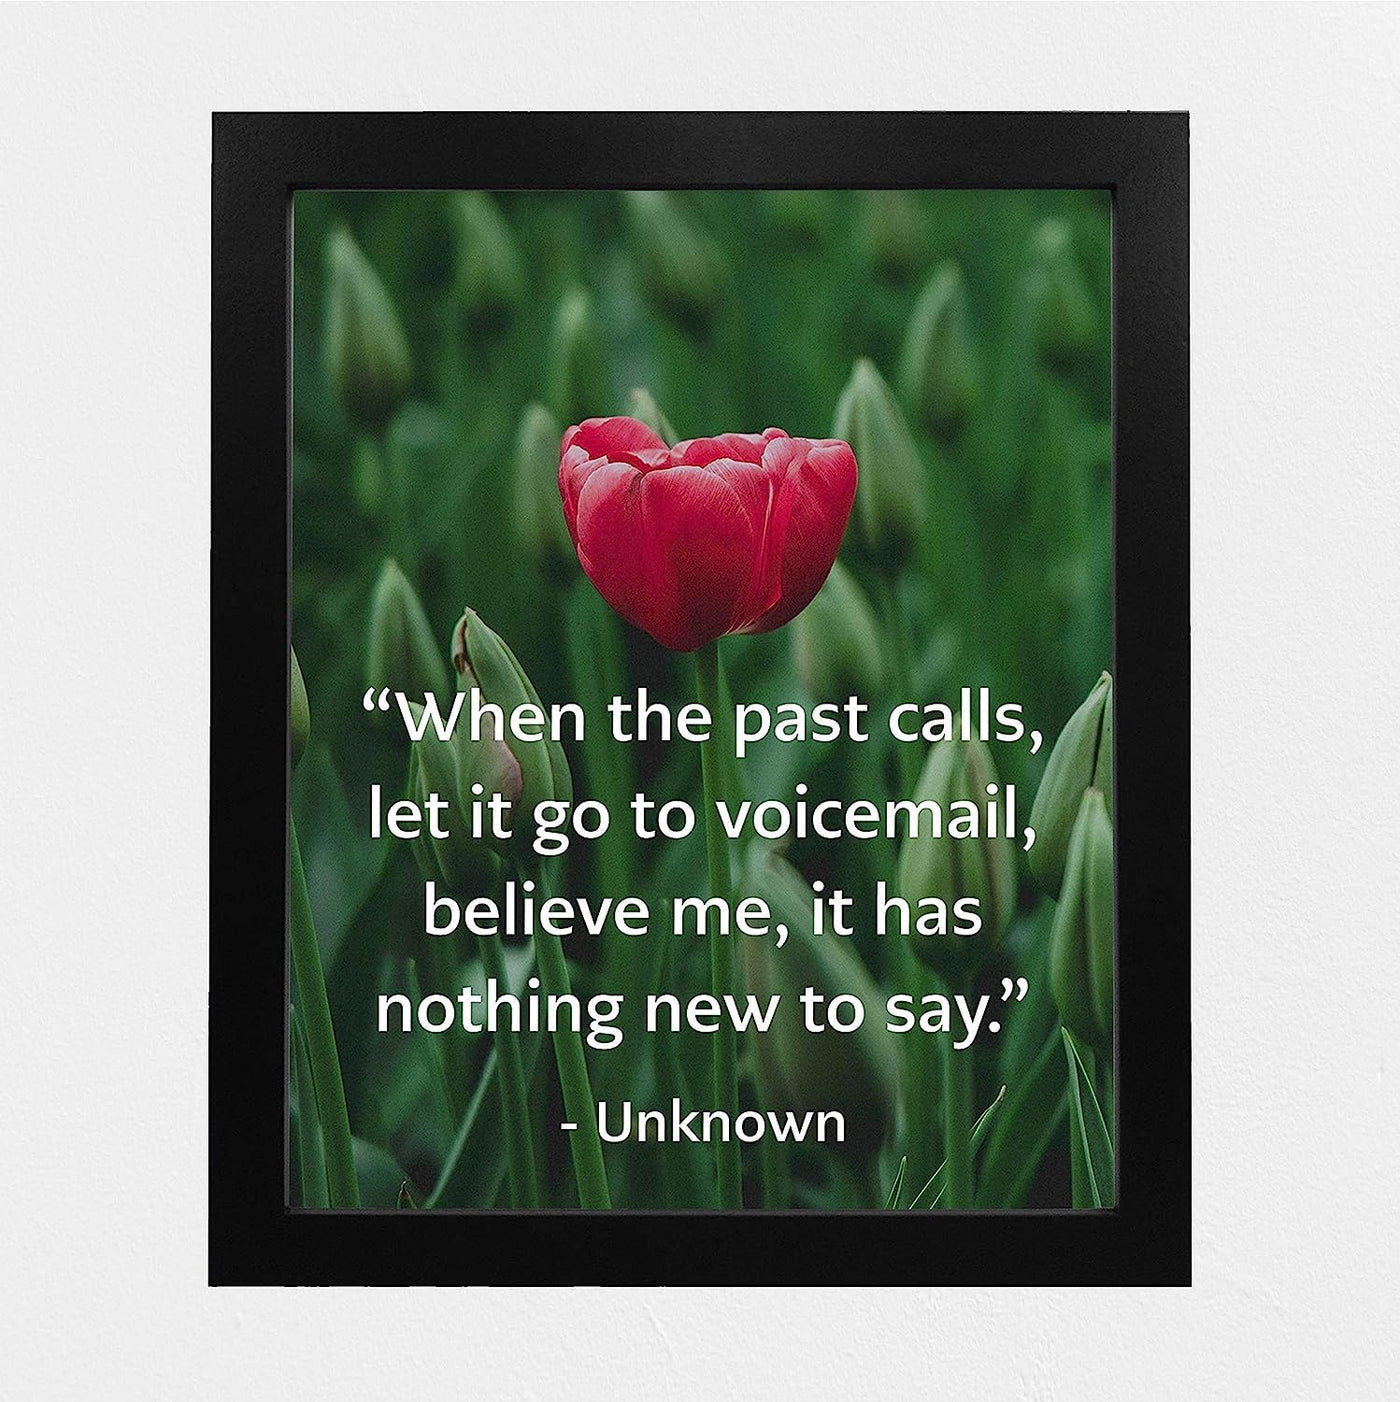 ?When the Past Calls-Let It Go To Voicemail" Inspirational Quotes Wall Art -8 x 10" Floral Typographic Photo Print-Ready to Frame. Positive Quote for Home-Office-Studio-School Decor. Great Reminder!